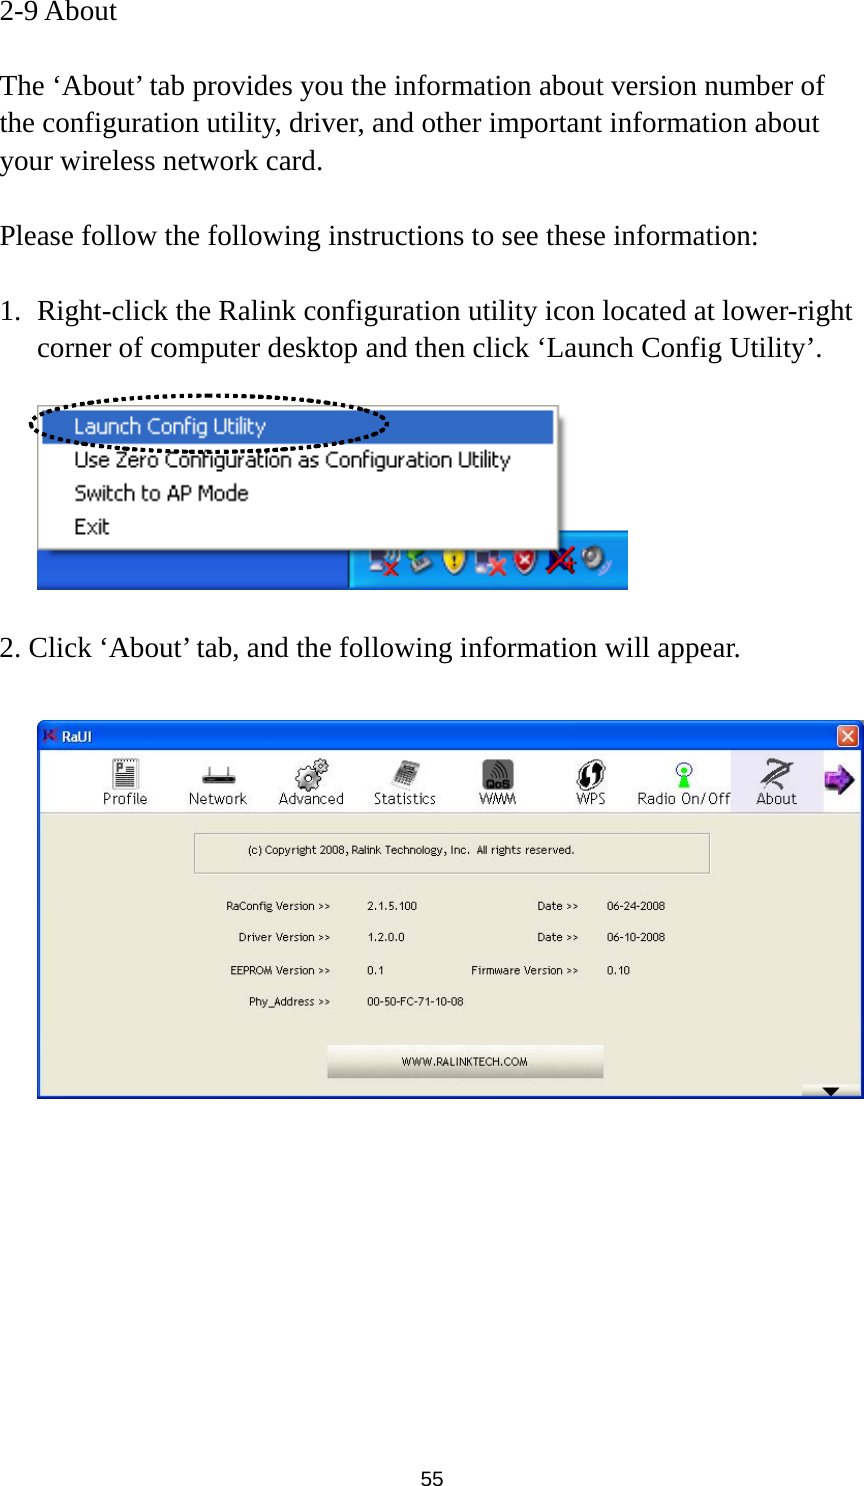  55 2-9 About  The ‘About’ tab provides you the information about version number of the configuration utility, driver, and other important information about your wireless network card.  Please follow the following instructions to see these information:  1. Right-click the Ralink configuration utility icon located at lower-right corner of computer desktop and then click ‘Launch Config Utility’.    2. Click ‘About’ tab, and the following information will appear.      